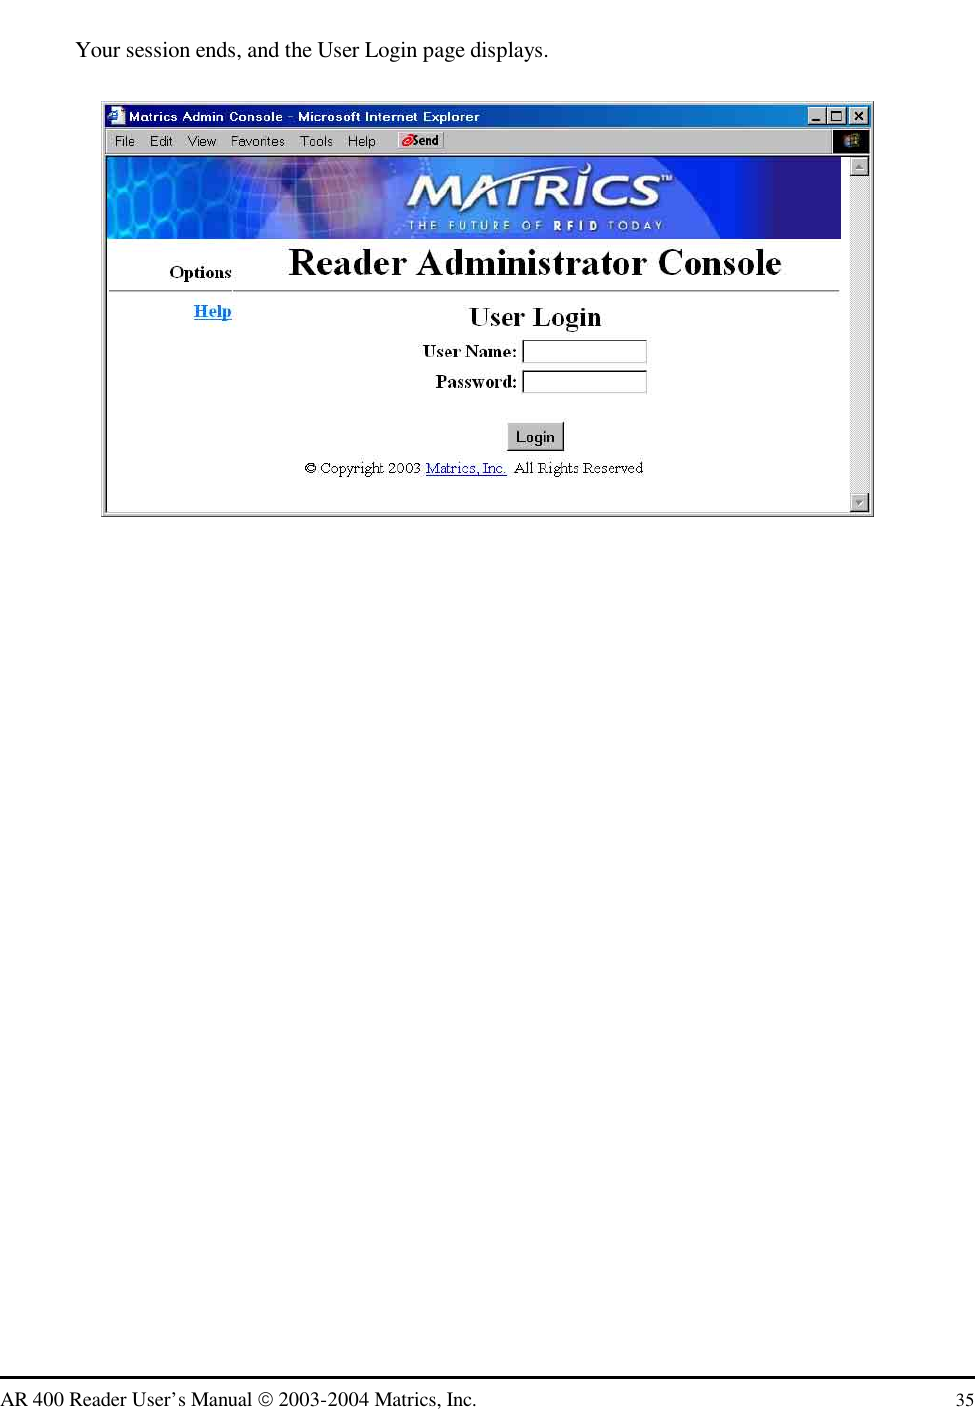   AR 400 Reader User’s Manual  2003-2004 Matrics, Inc.  35 Your session ends, and the User Login page displays.  